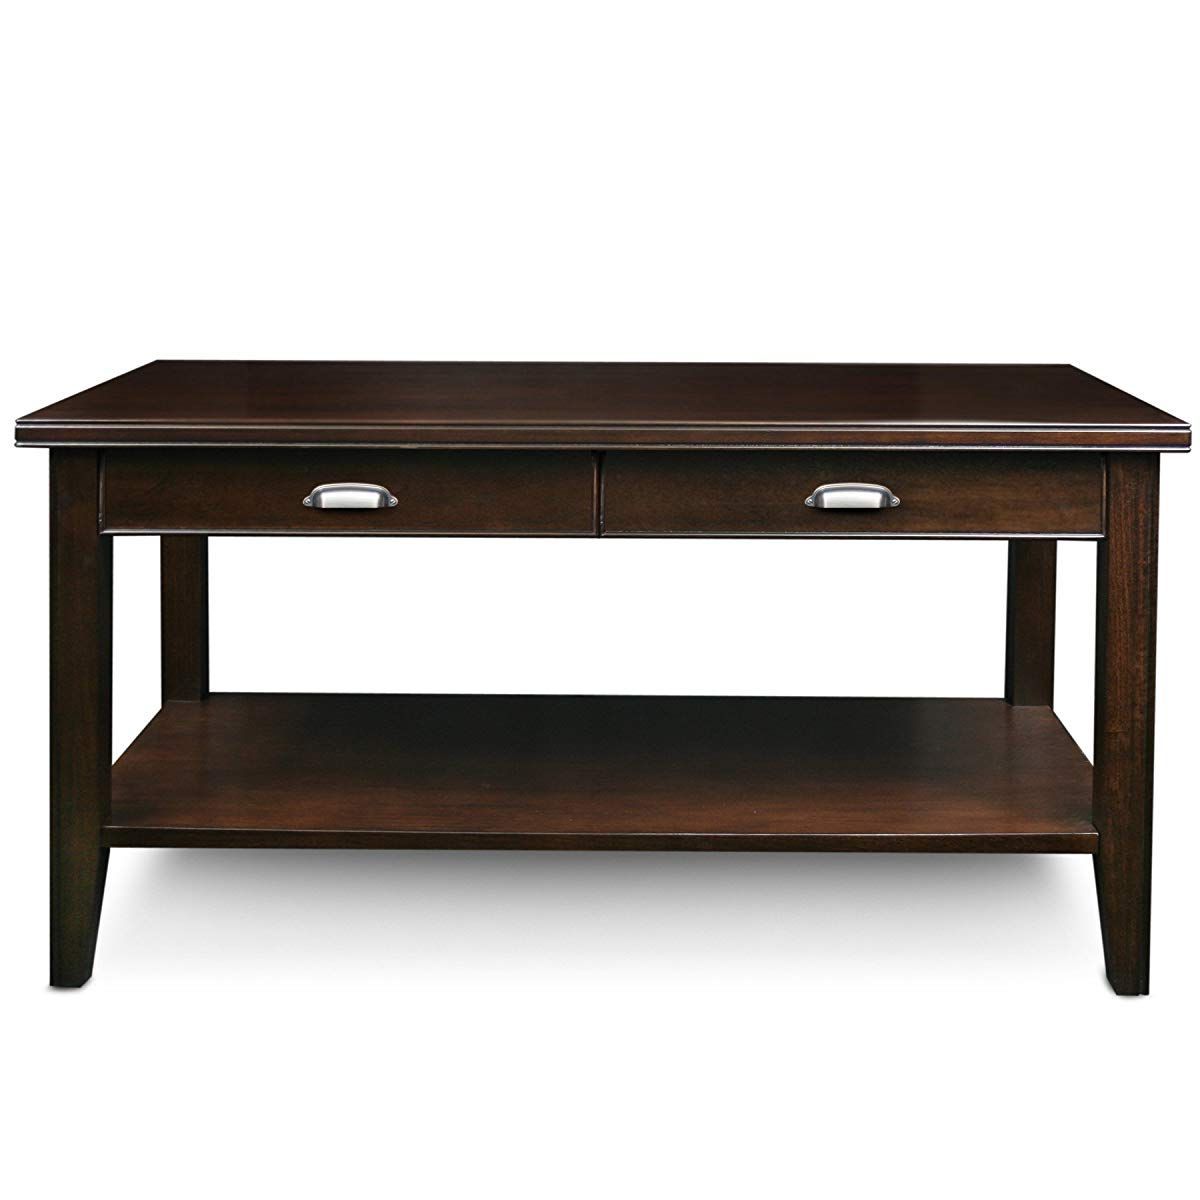 Best And Newest 2 Drawer Coffee Tables Inside 2 Drawer Coffee Table (View 7 of 10)